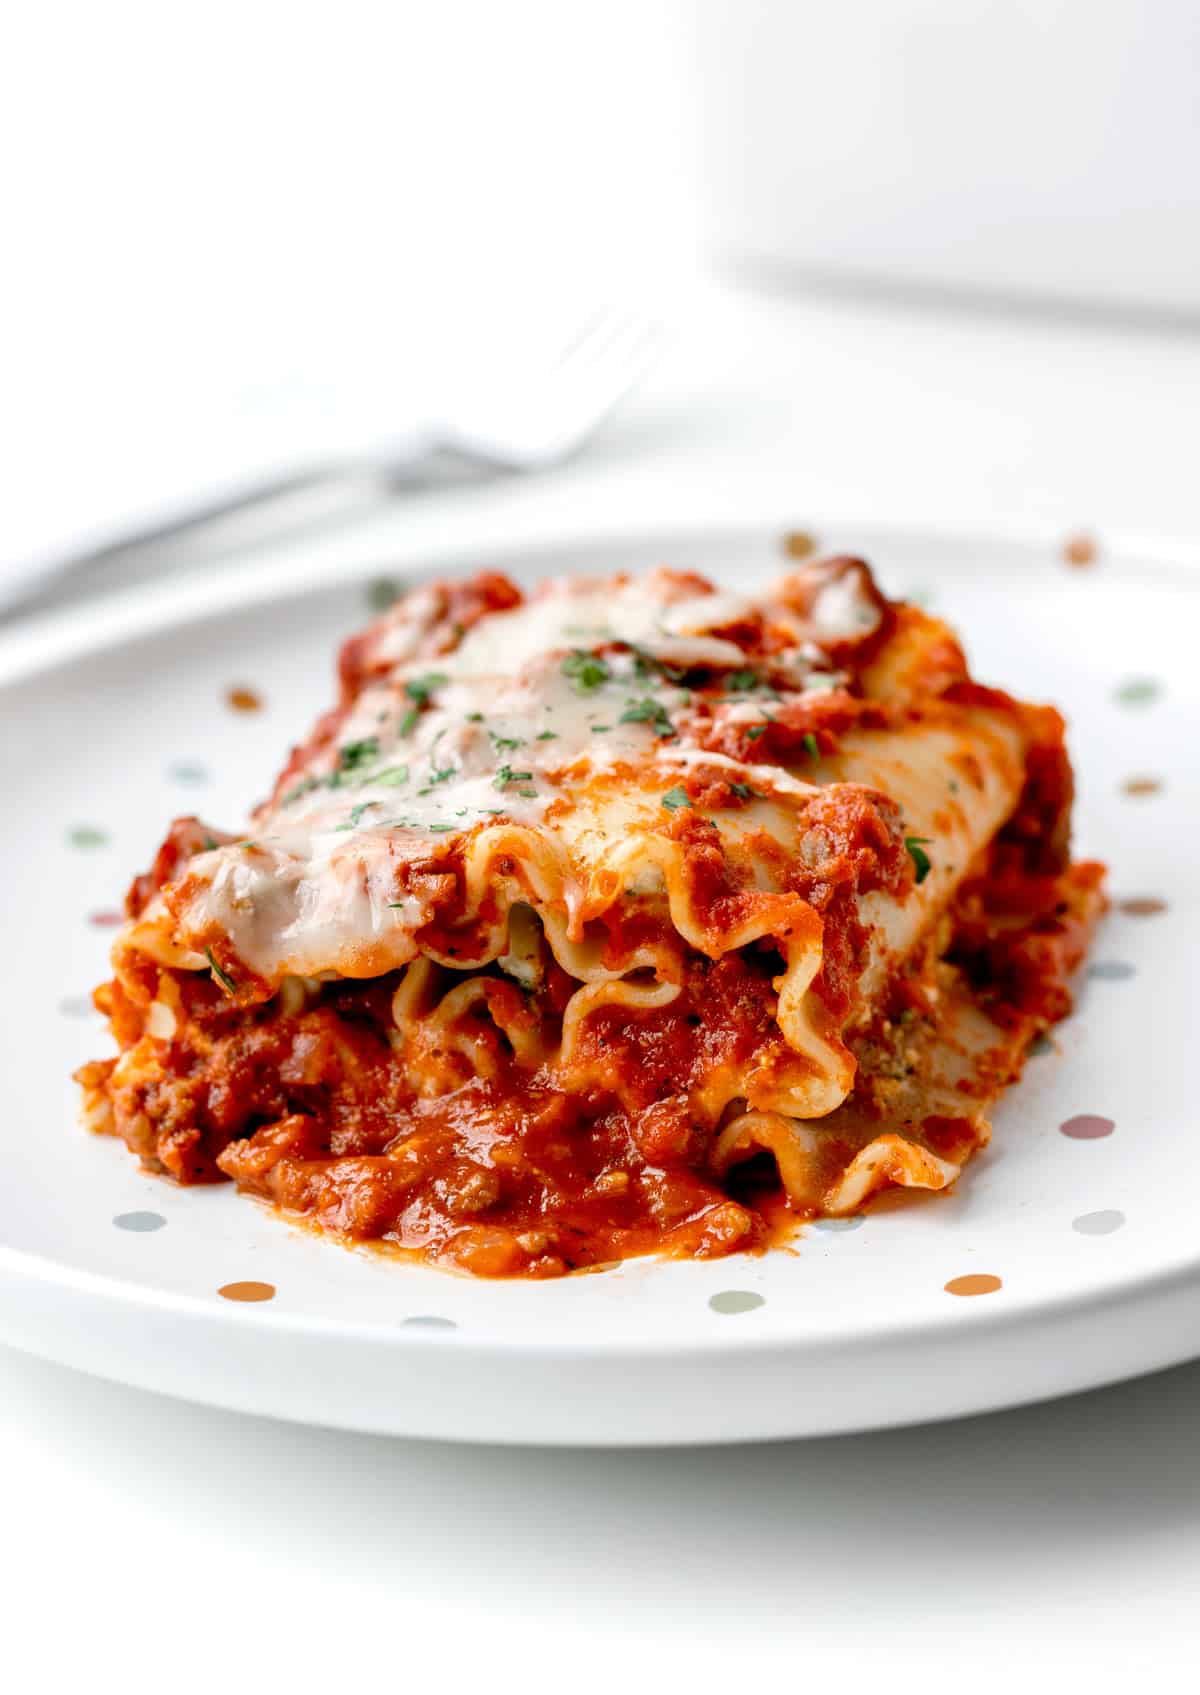 A kid-friendly lasagna roll up on a decorative plate.